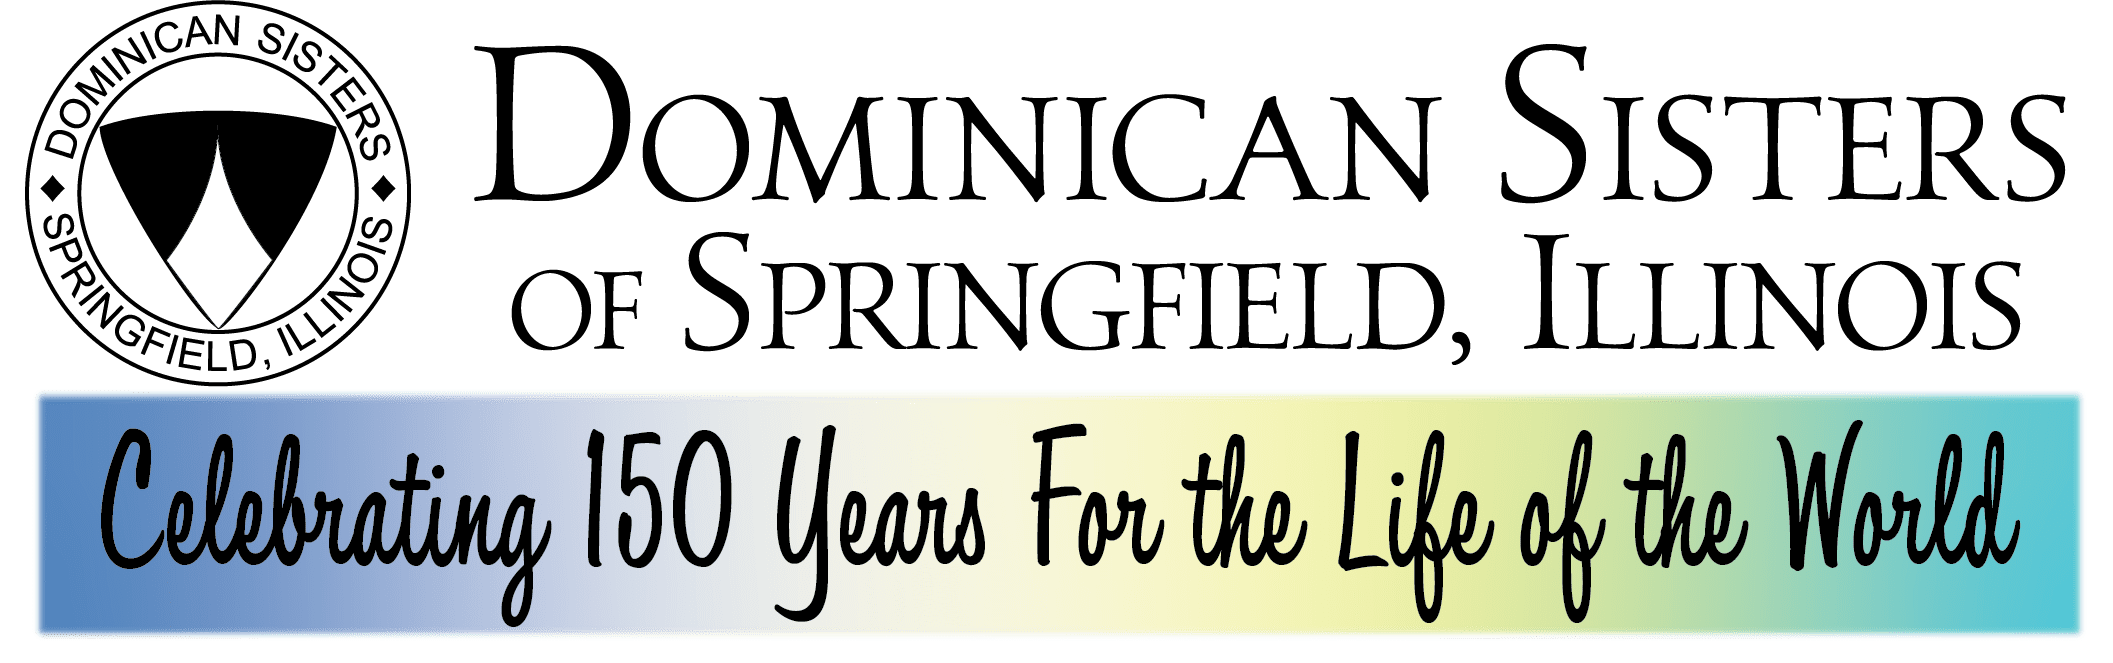 Sheild emblem for Dominican Sisters of Springfield, IL. Multi-colored pastel box with words "Celebrating 150 Years For the Life of the World"